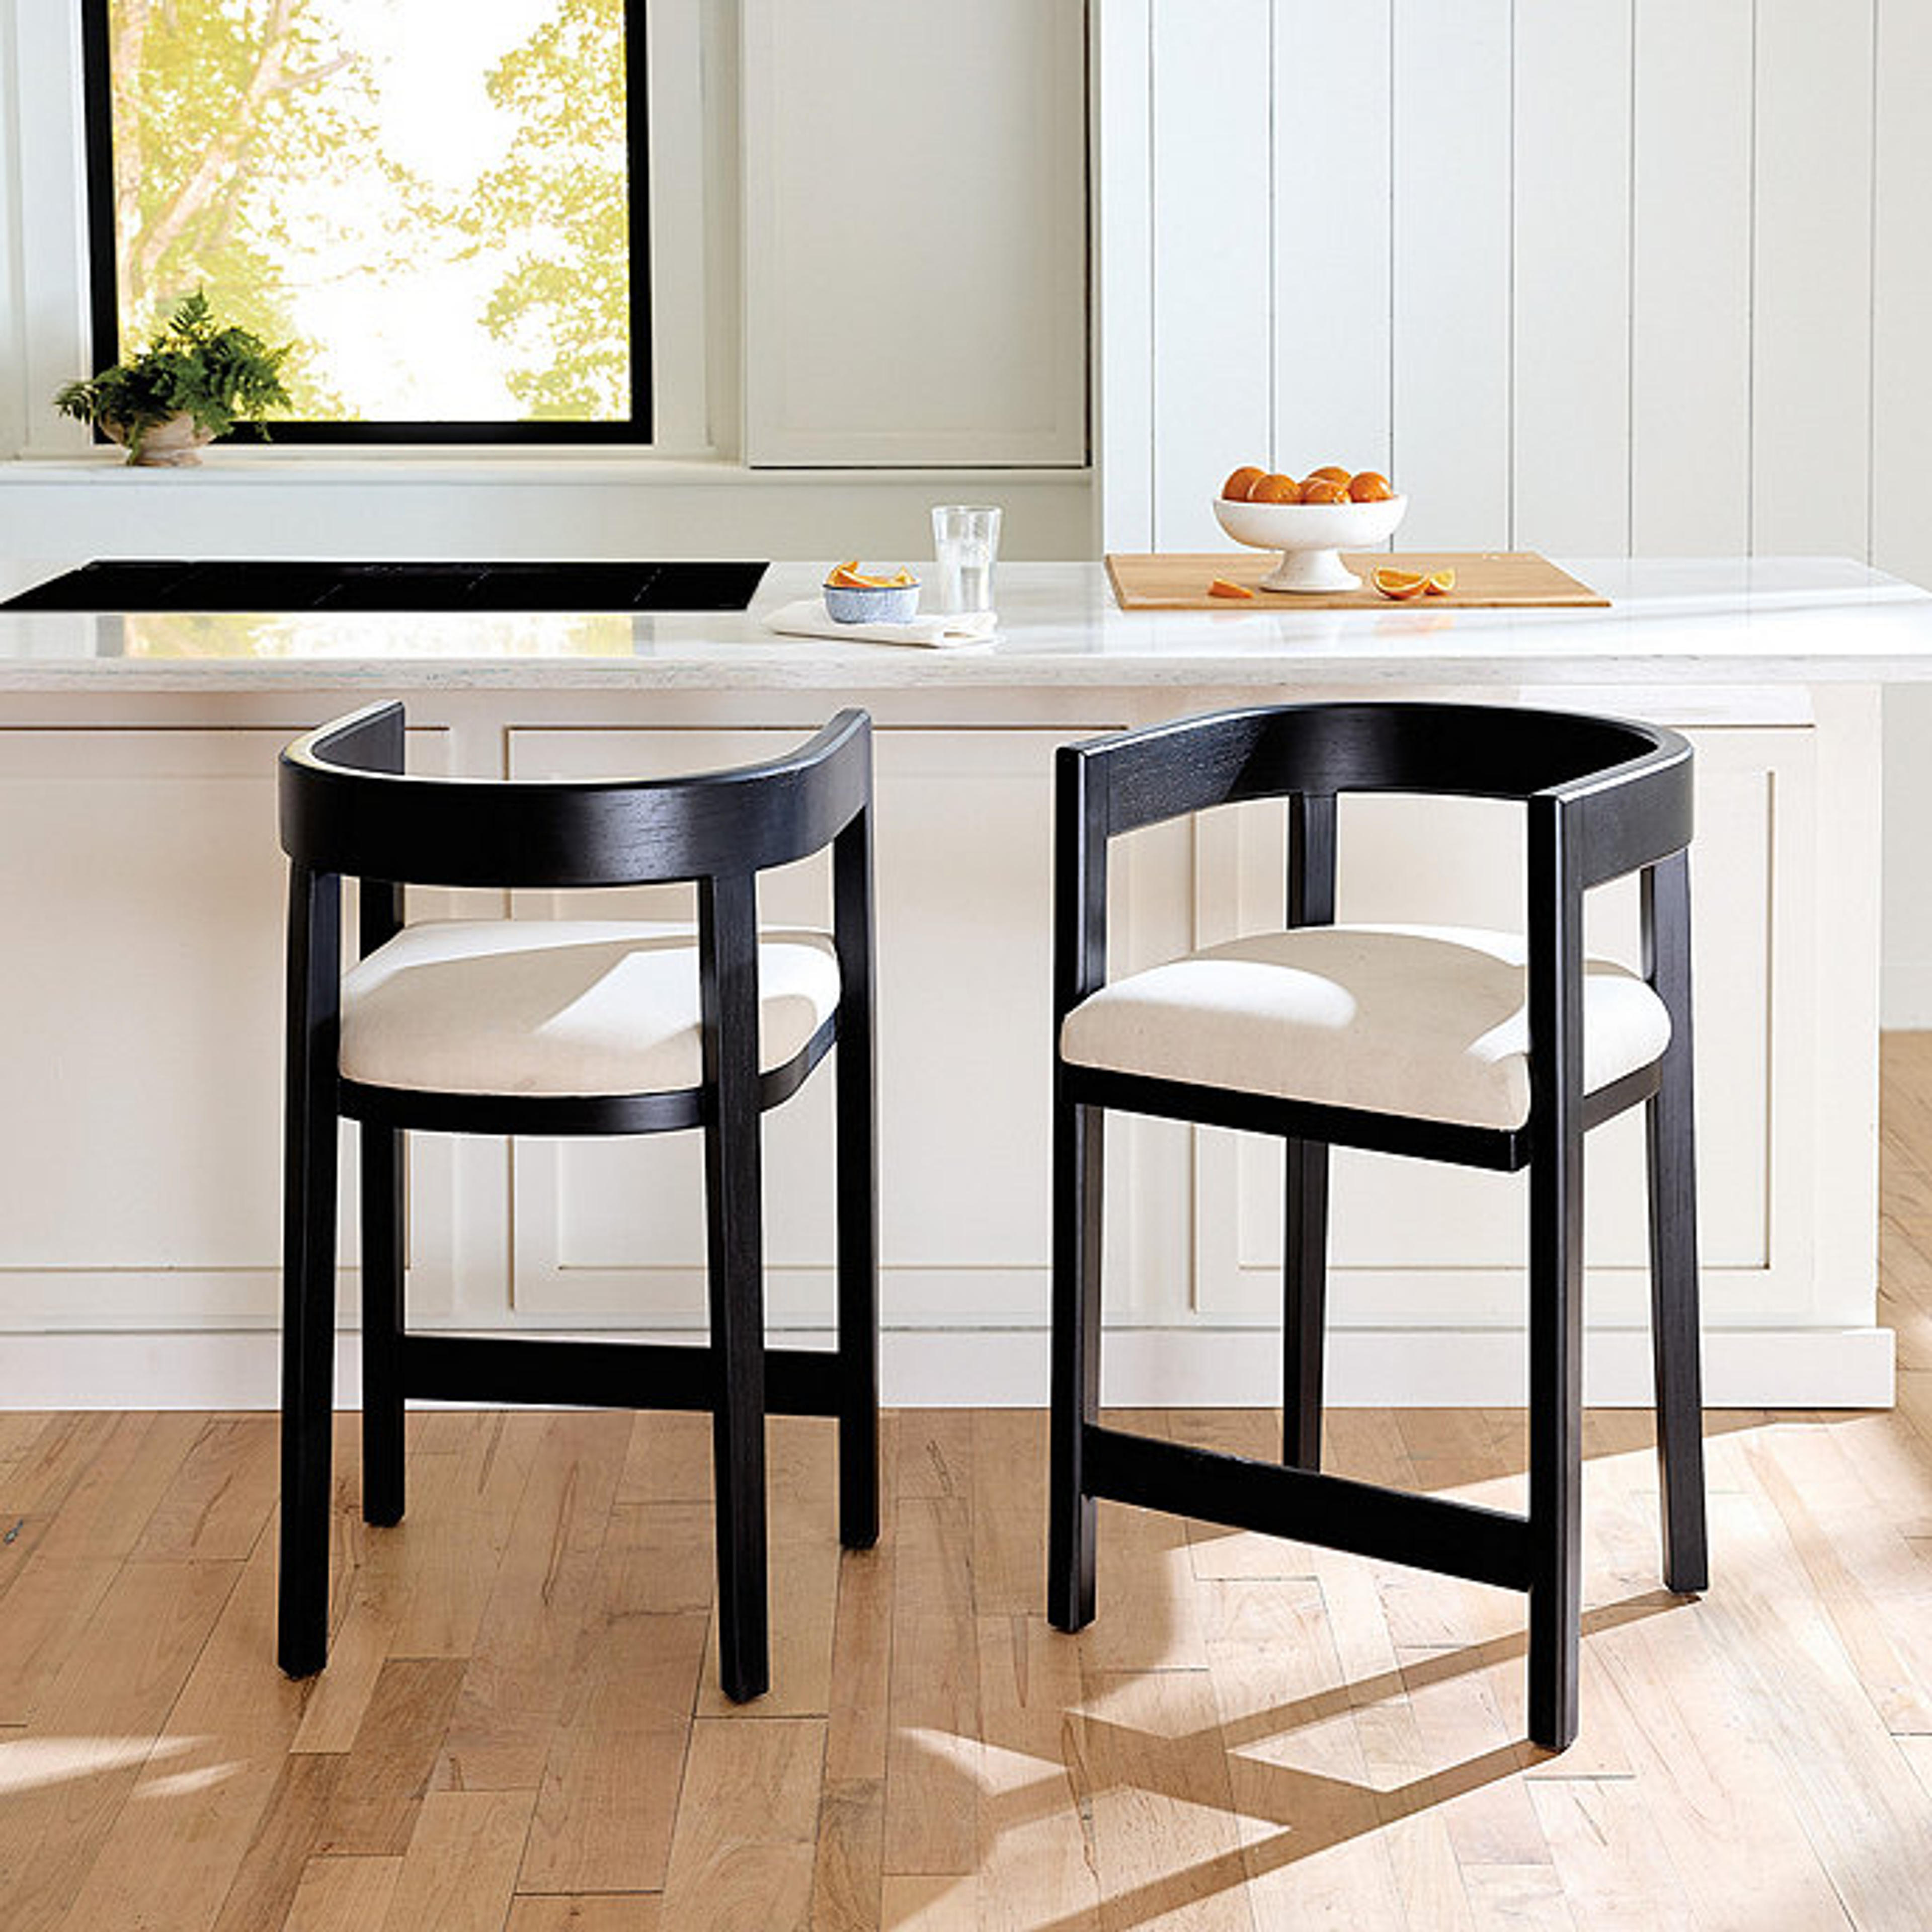 Hugo Upholstered Counter Stool with Back in Sandberg Parchment